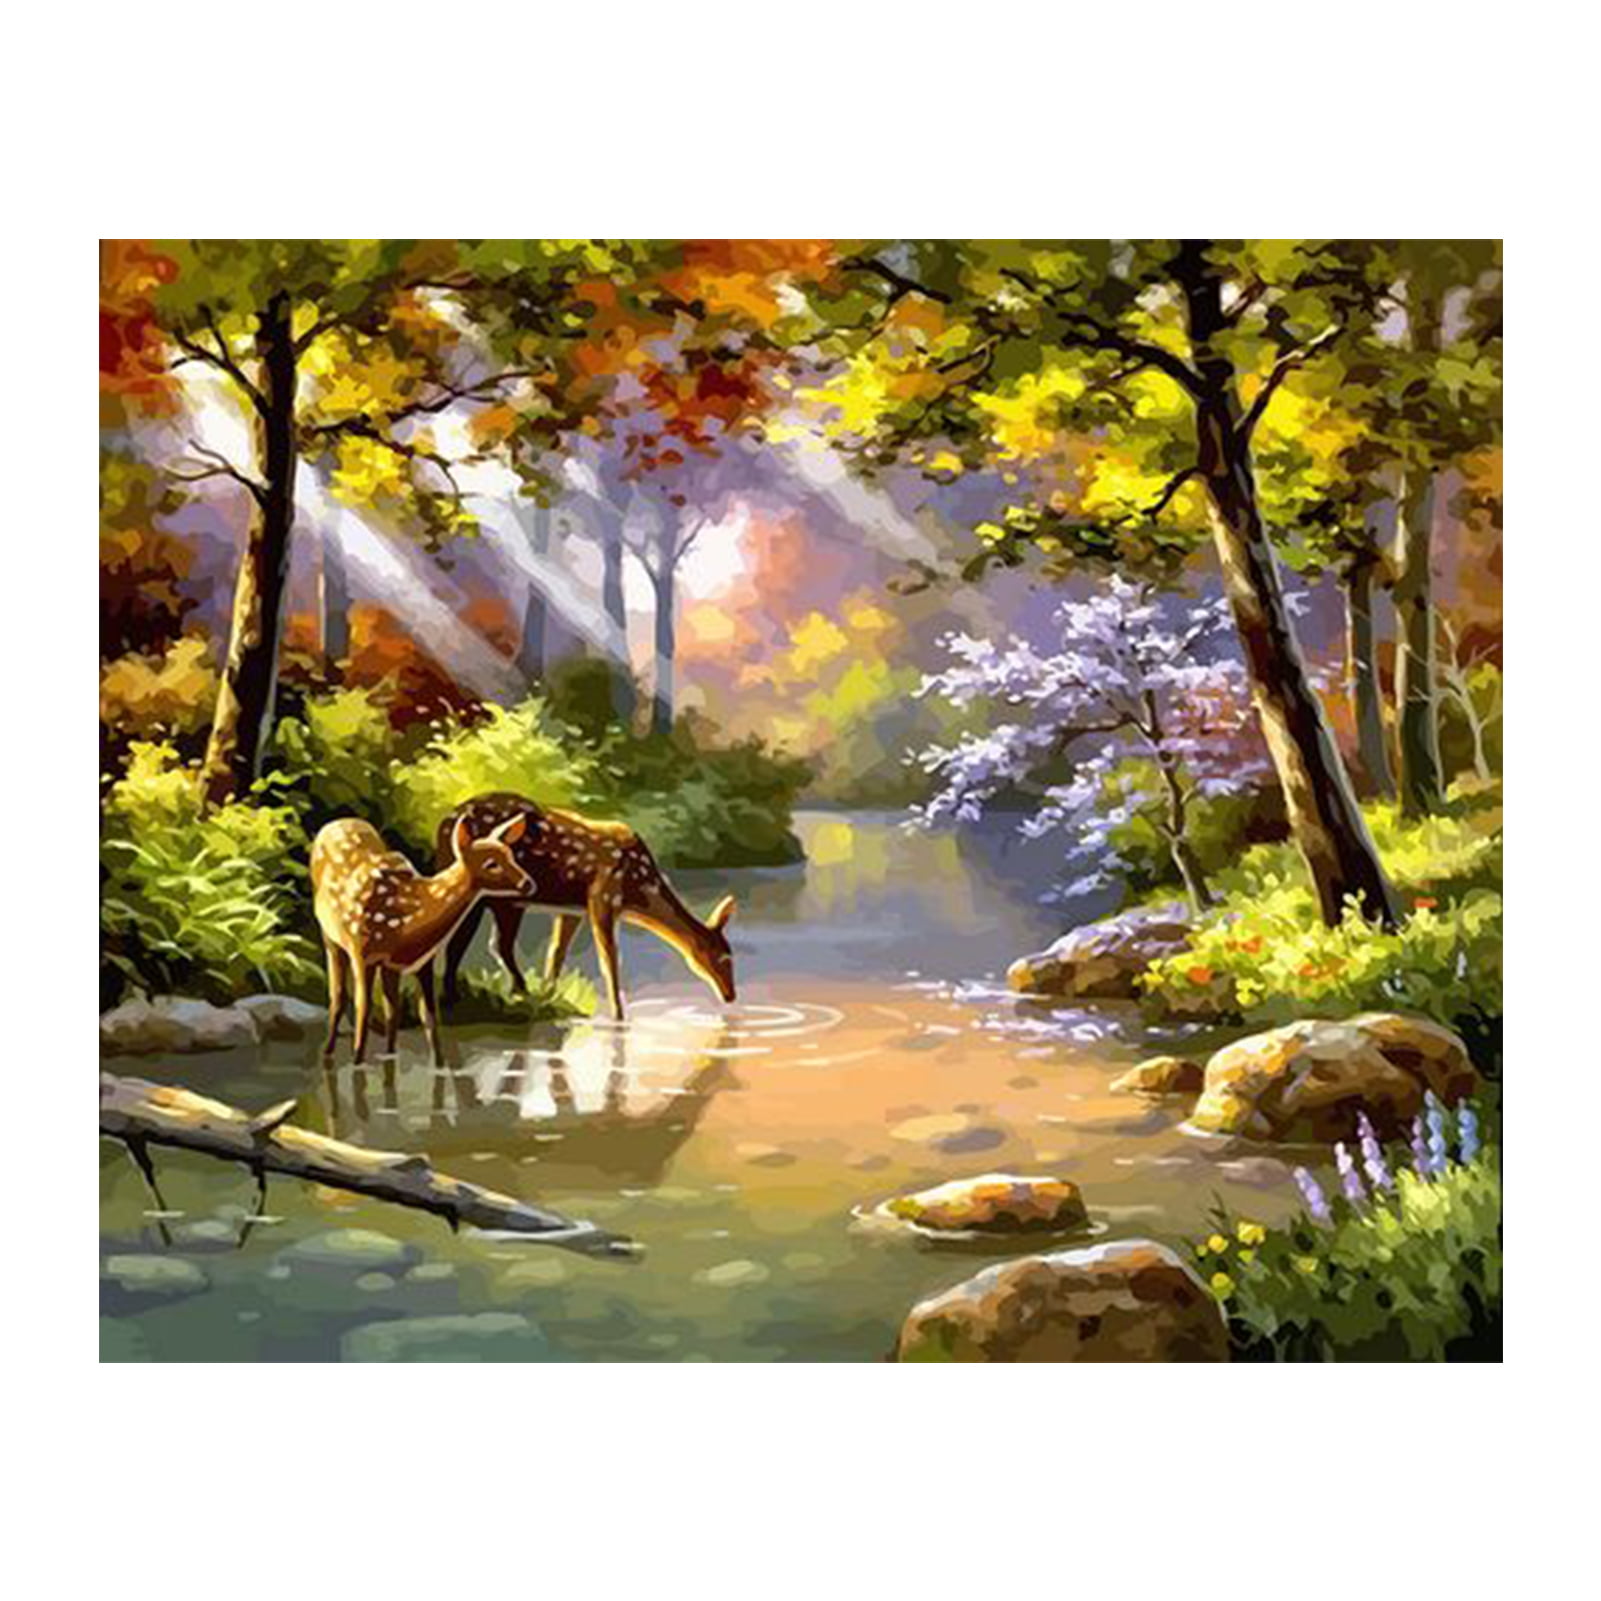 DIY Paint By Number Kit Digital Animal Scenery Oil Painting Artwork Home Decor